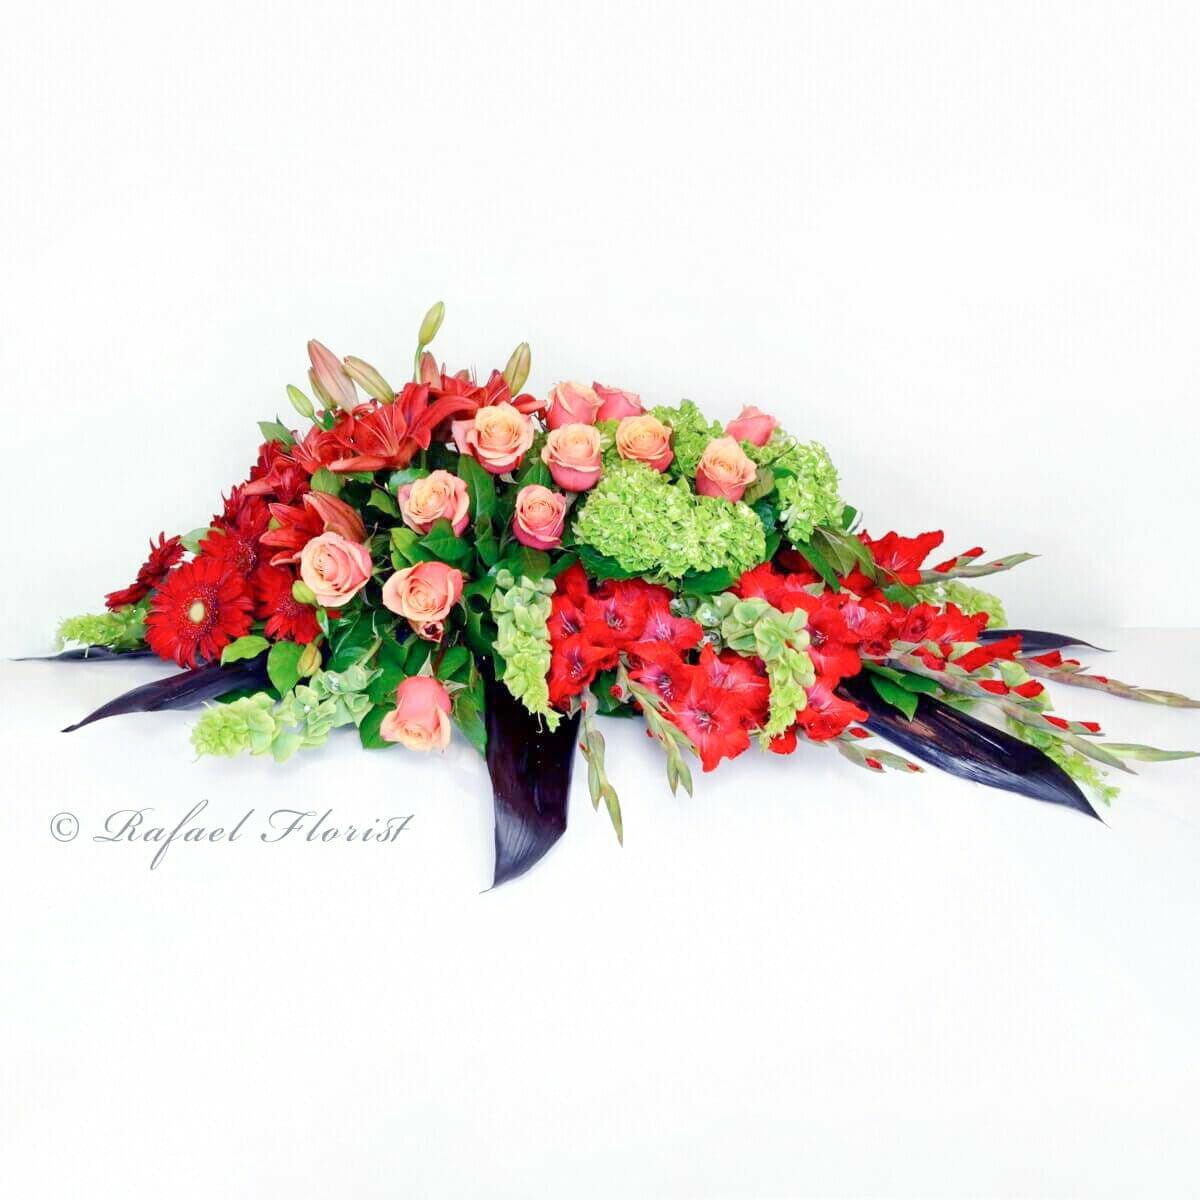 red funeral flowers bouquet: send and deliver Funerals to United